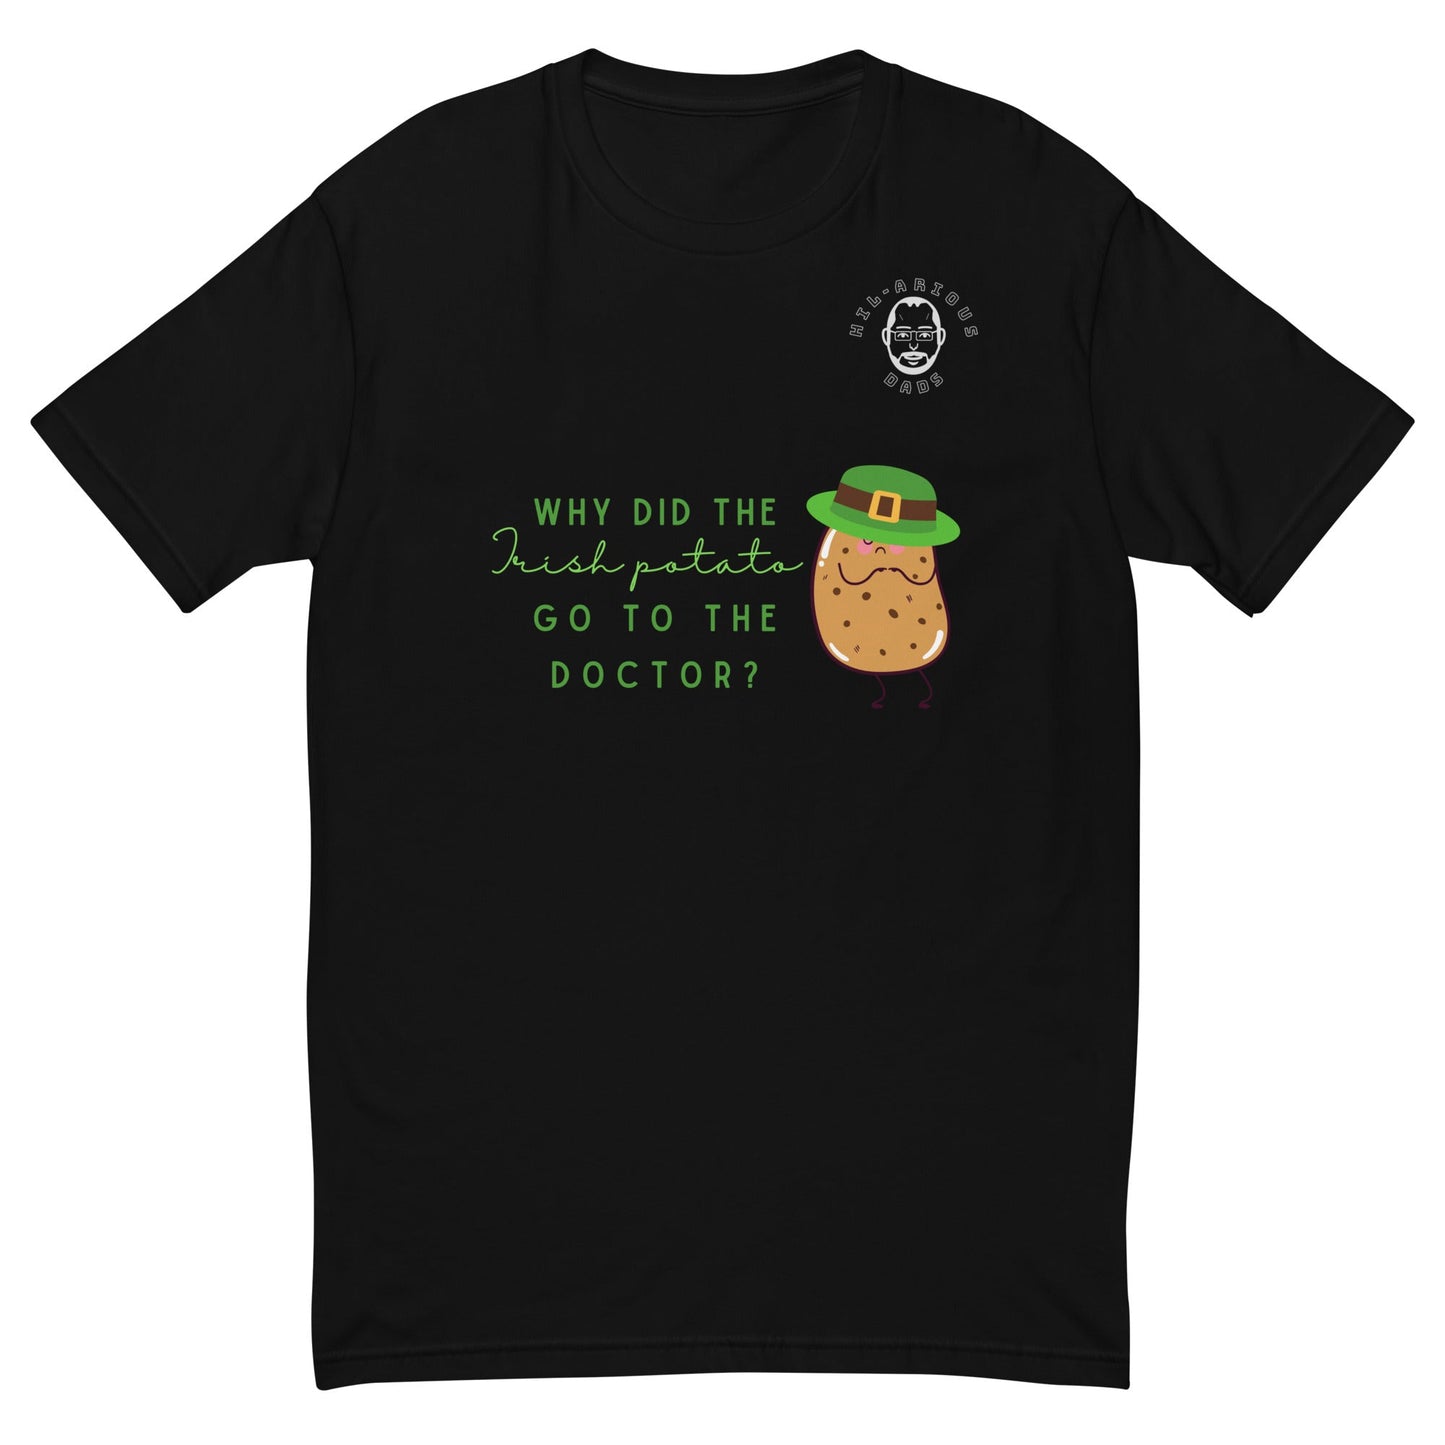 Why did the Irish potato go to the doctor?-T-shirt - Hil-arious Dads